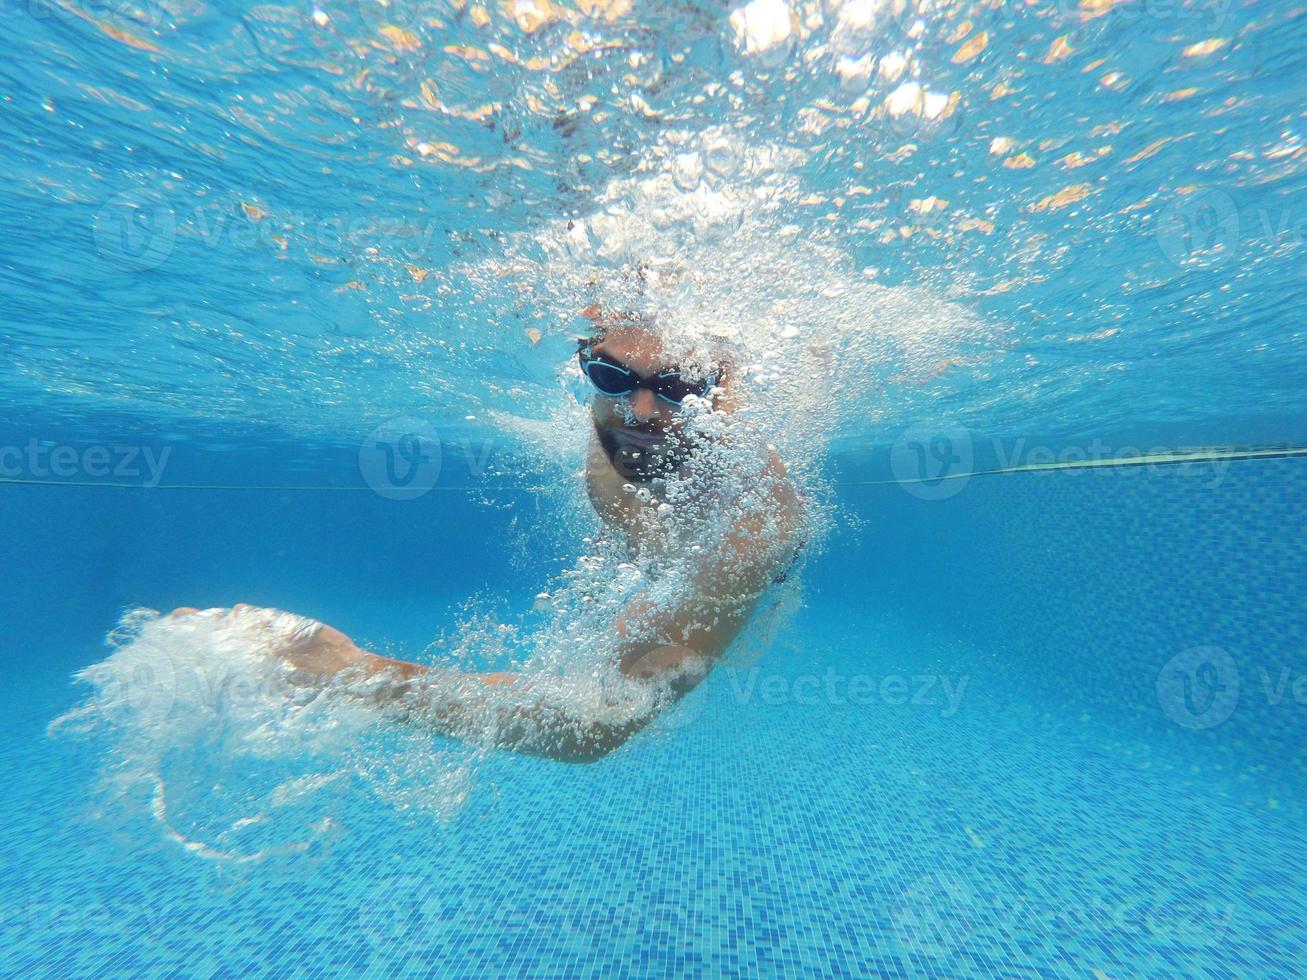 Beard man with glasses swimming under water in the pool photo